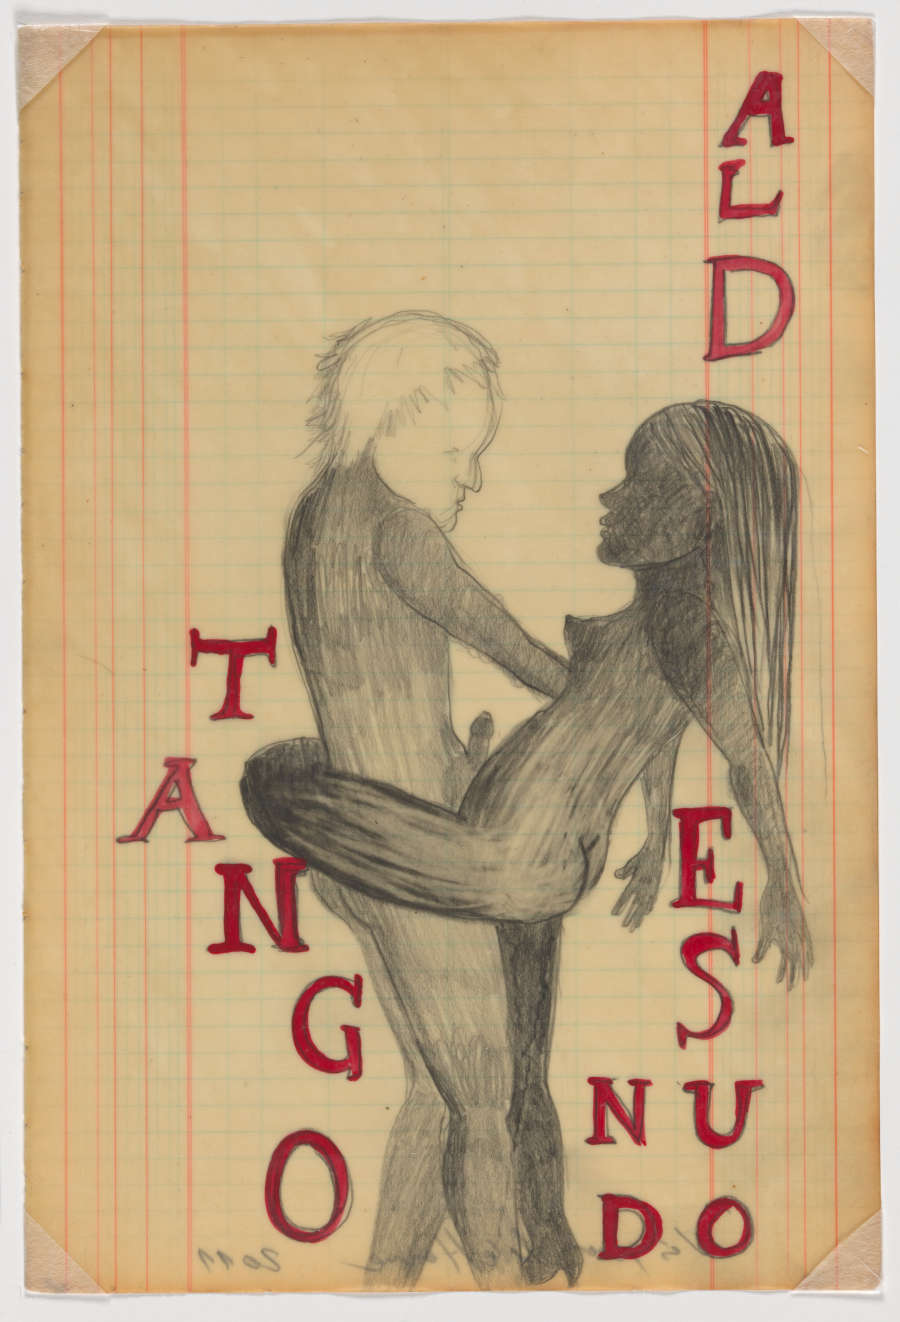 Graphite drawing of two figures facing each other. The female-presenting one has their face shaded in and their leg wrapped around the male-presenting one, whose face is unshaded. Red text falls vertically and reads: “TANGO AL DESNUDO.”